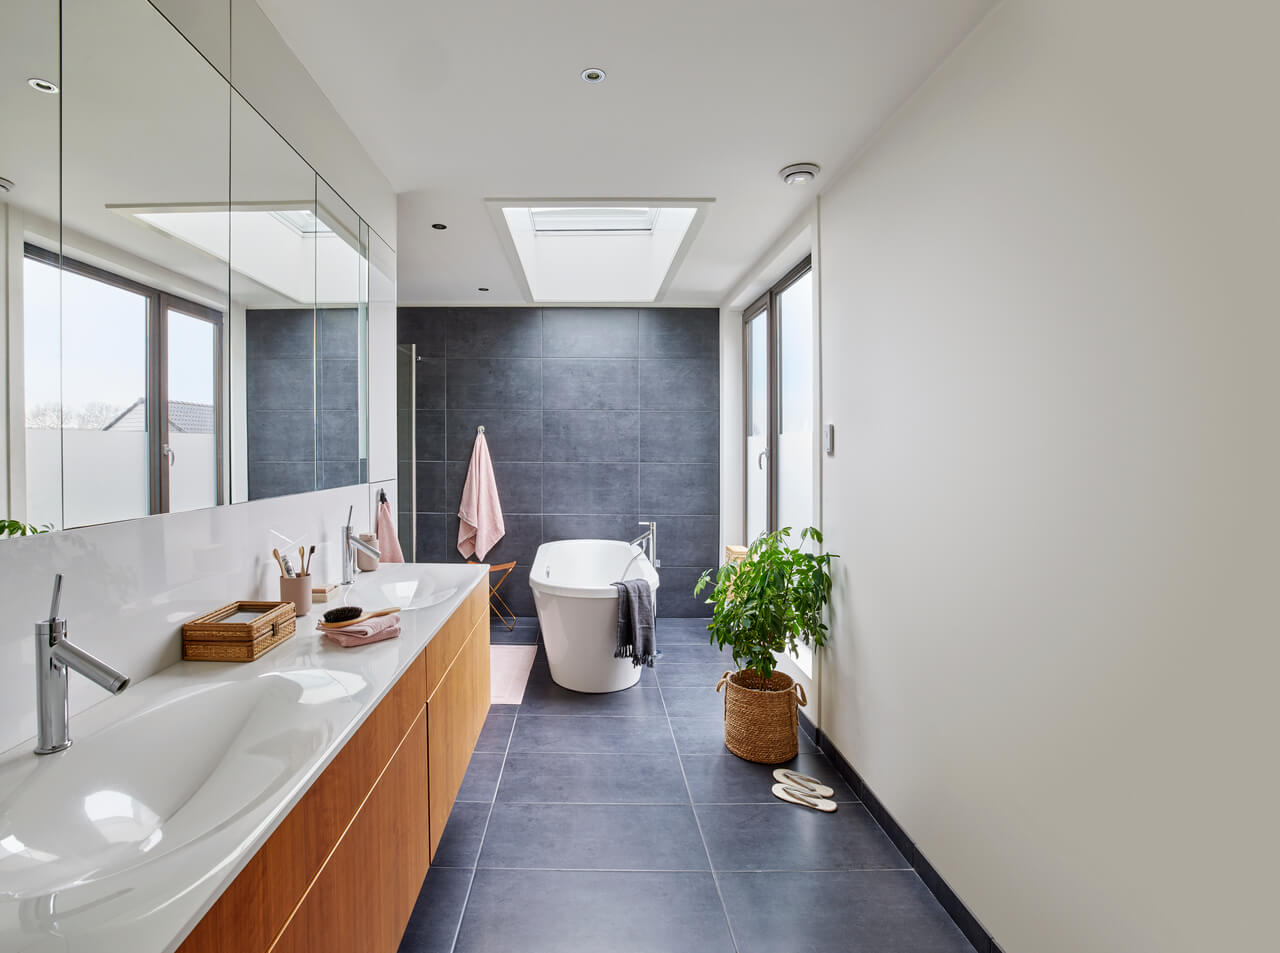 A bright bathroom with roof window just above the bathtub.